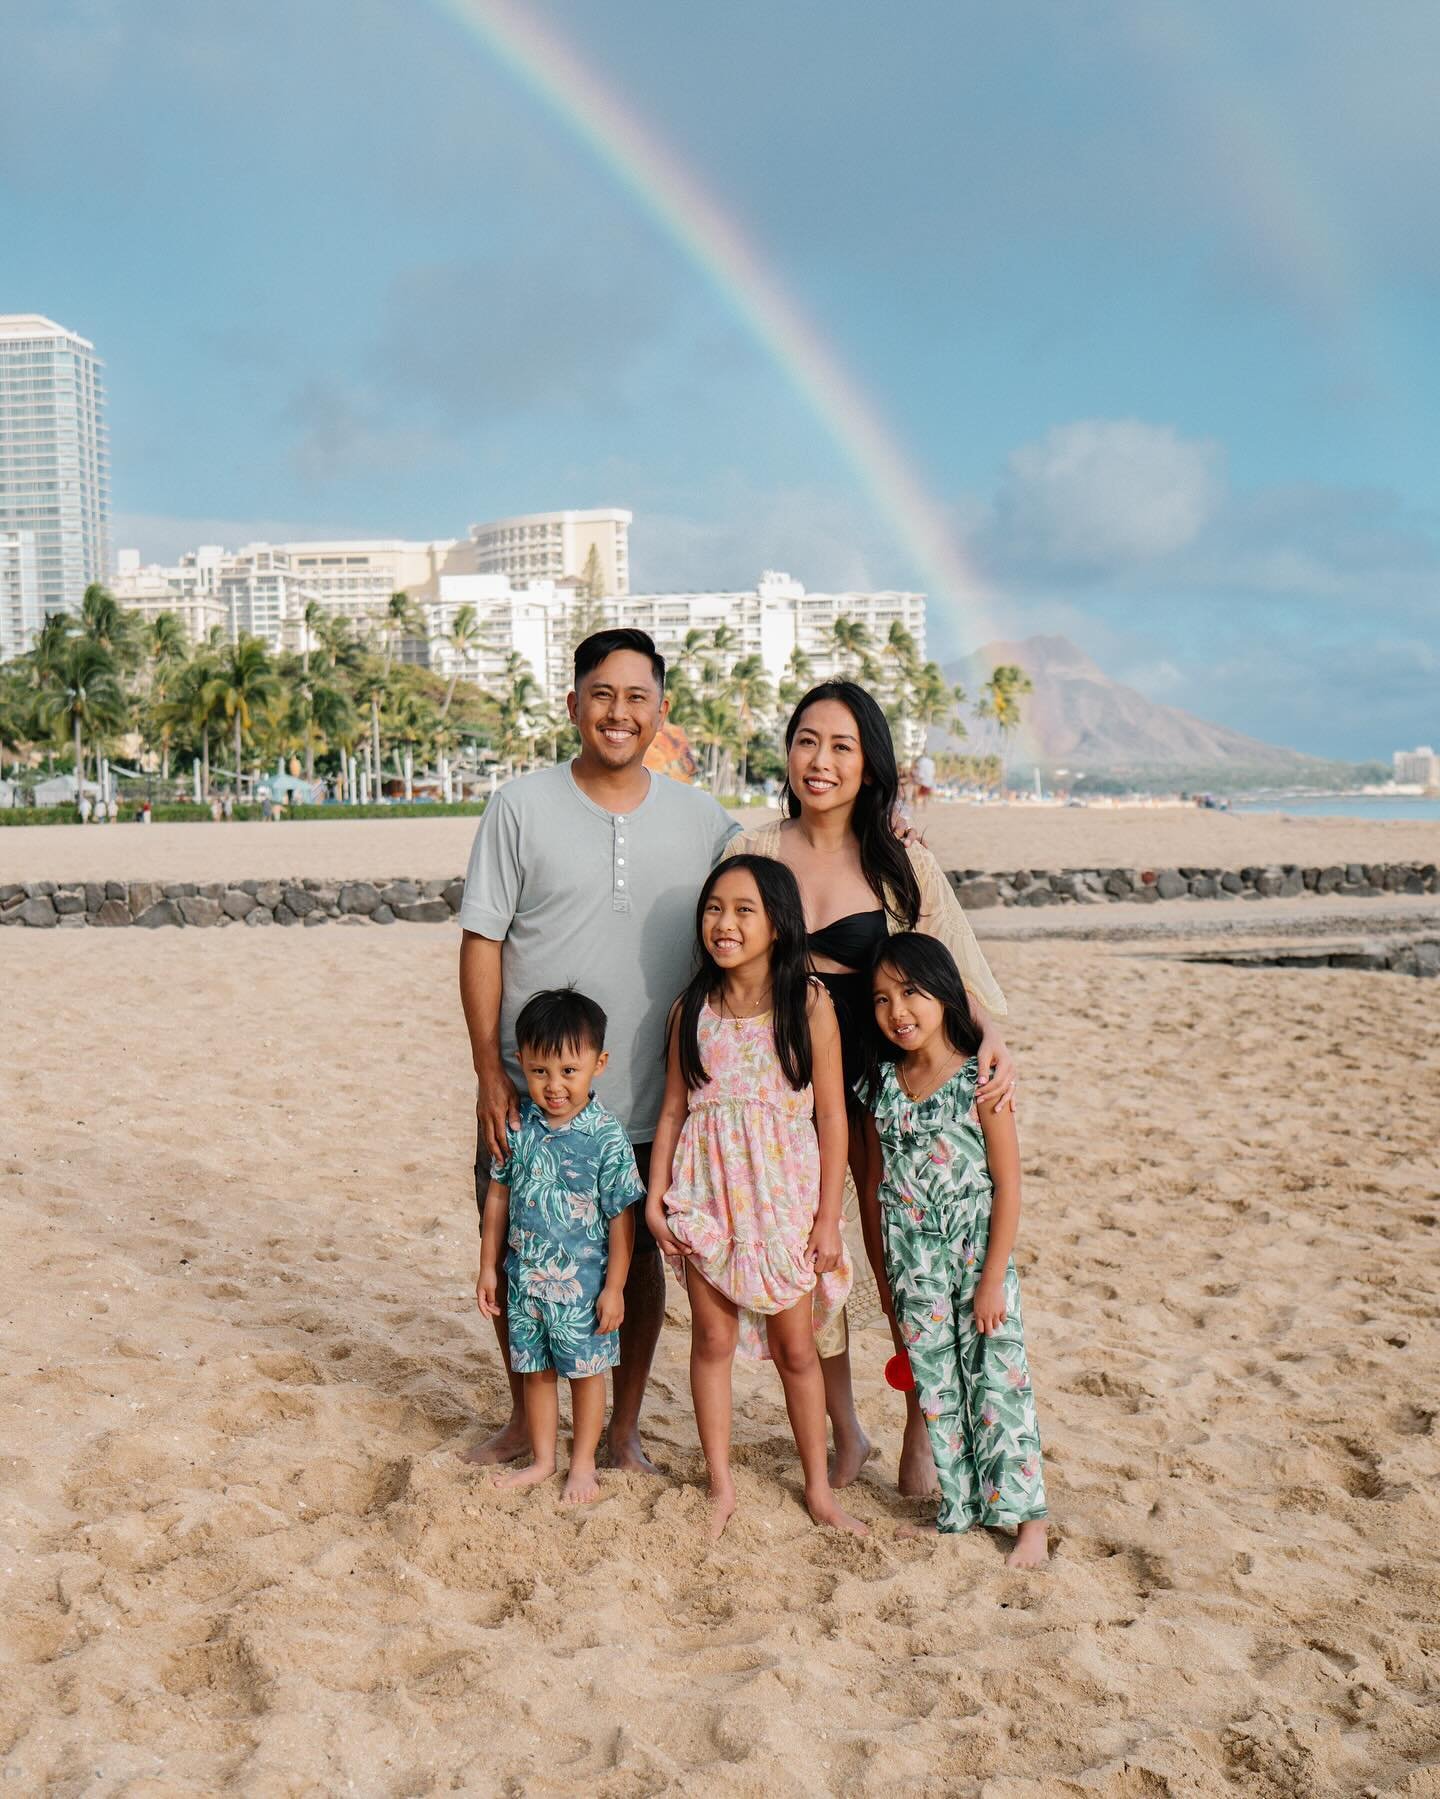 Feeling grateful for family time in Hawaii! Unlocking precious memories with my Ohana and reminiscing about the day I proposed to Jane 12 years ago. 🌴🌺🌈